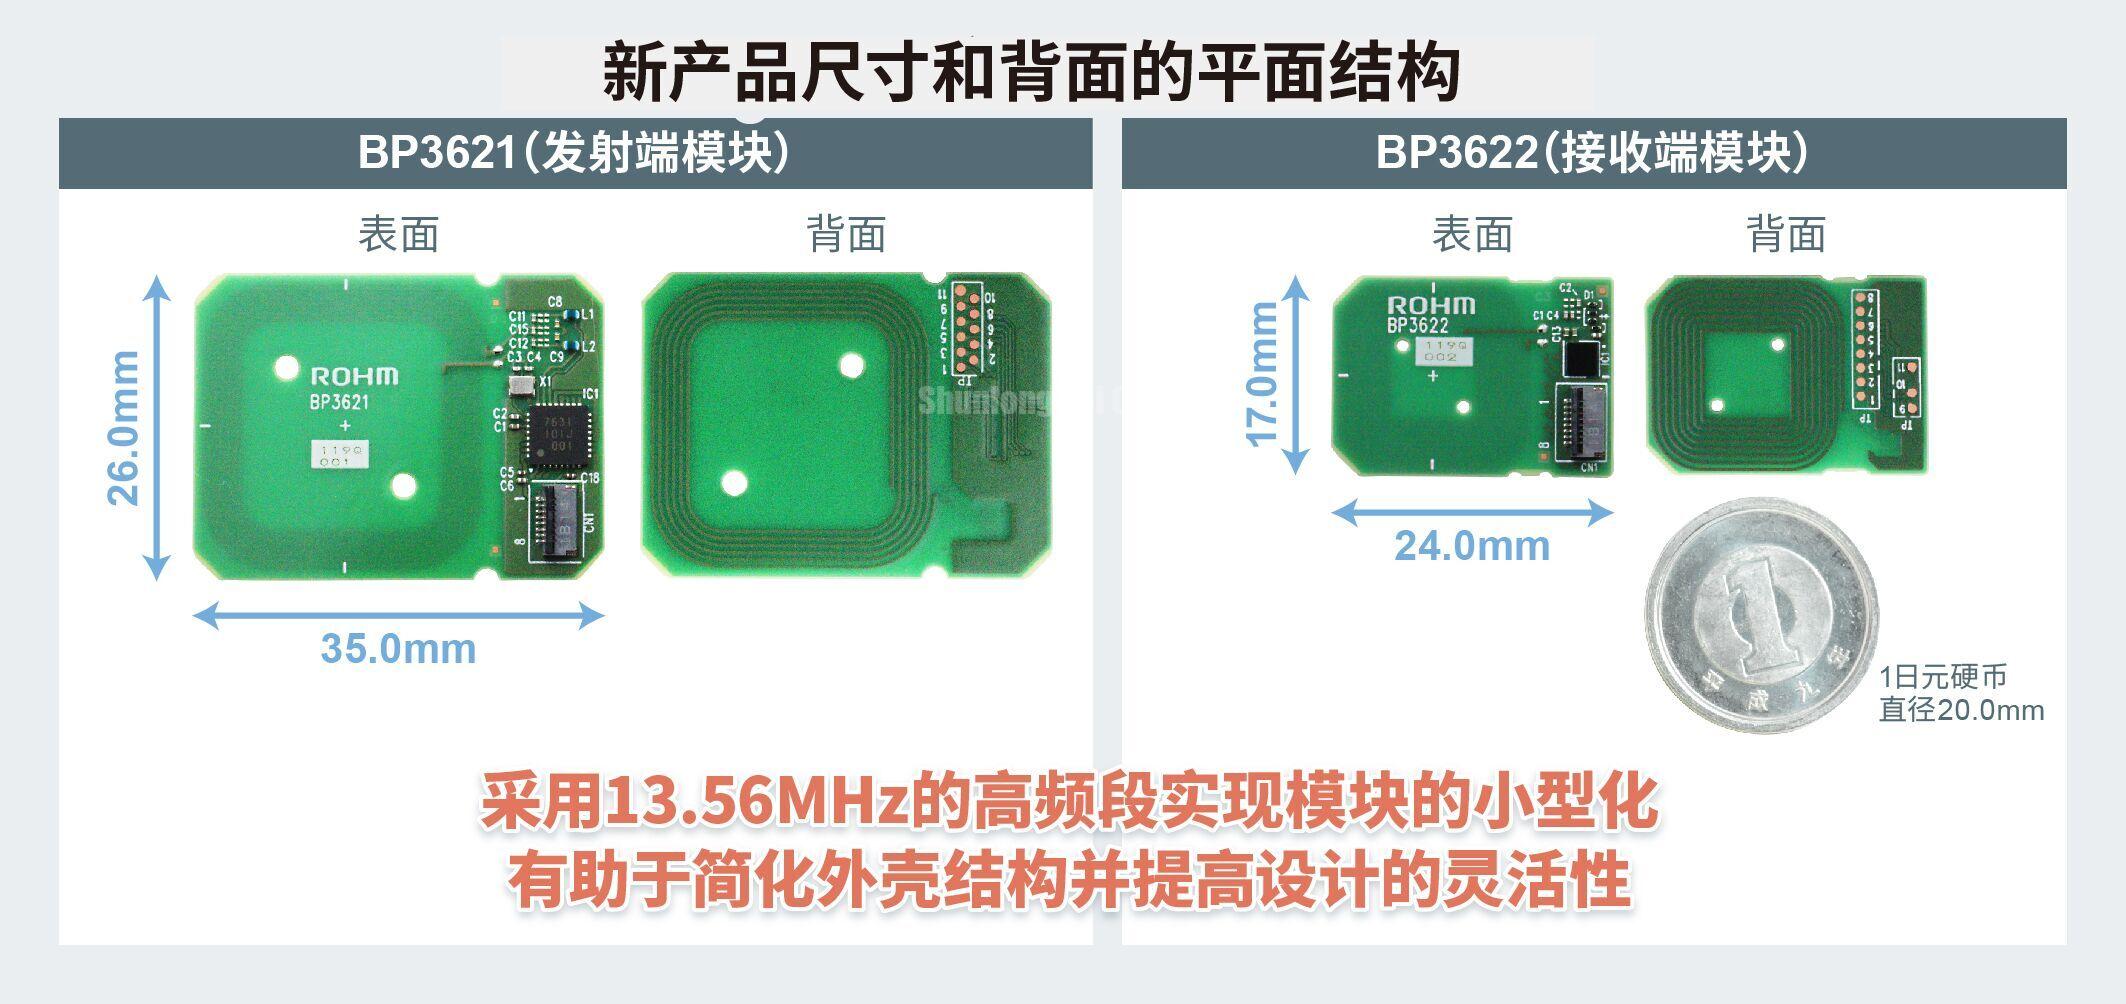 ROHM has developed wireless charging modules &#8220;BP3621&#8221; and &#8220;BP3622&#8221; that easily realize wireless power supply for small and thin devices